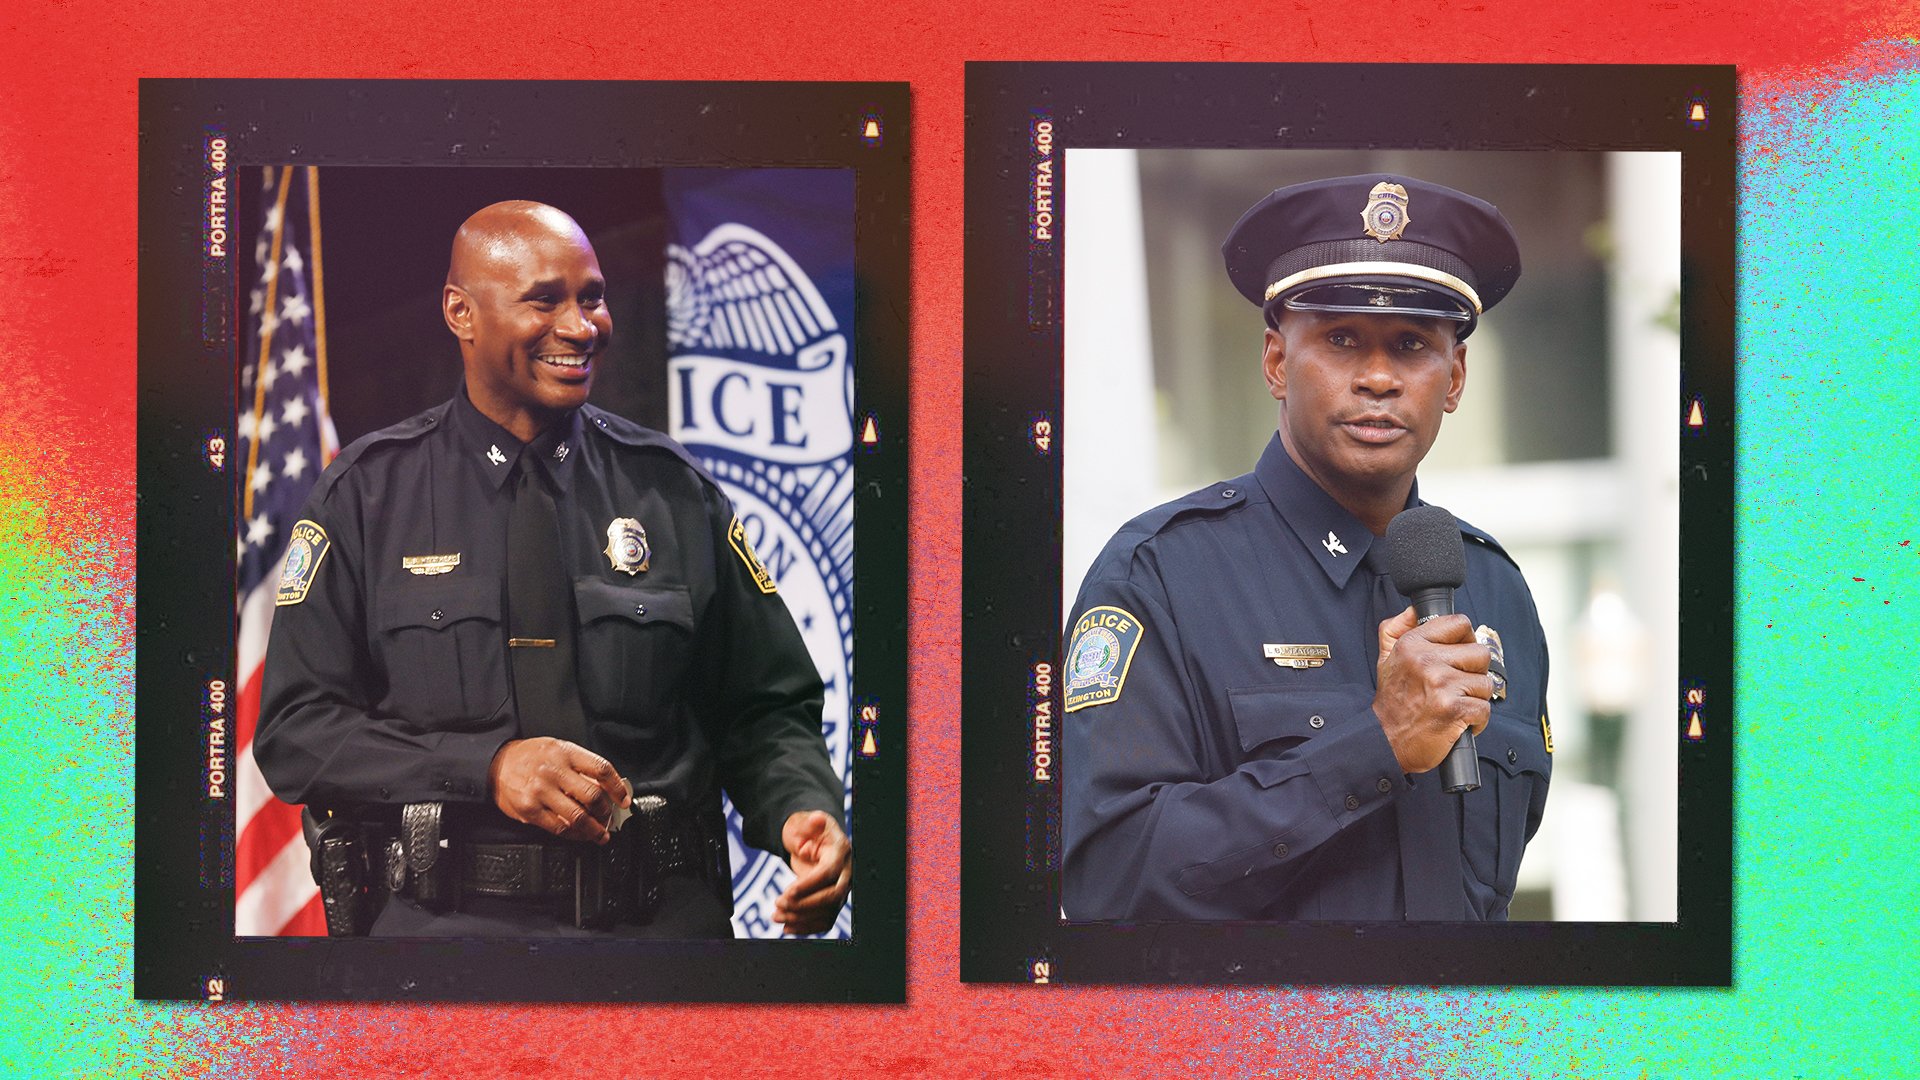 Two images side by side of uniformed police officers with badges visible, one saluting